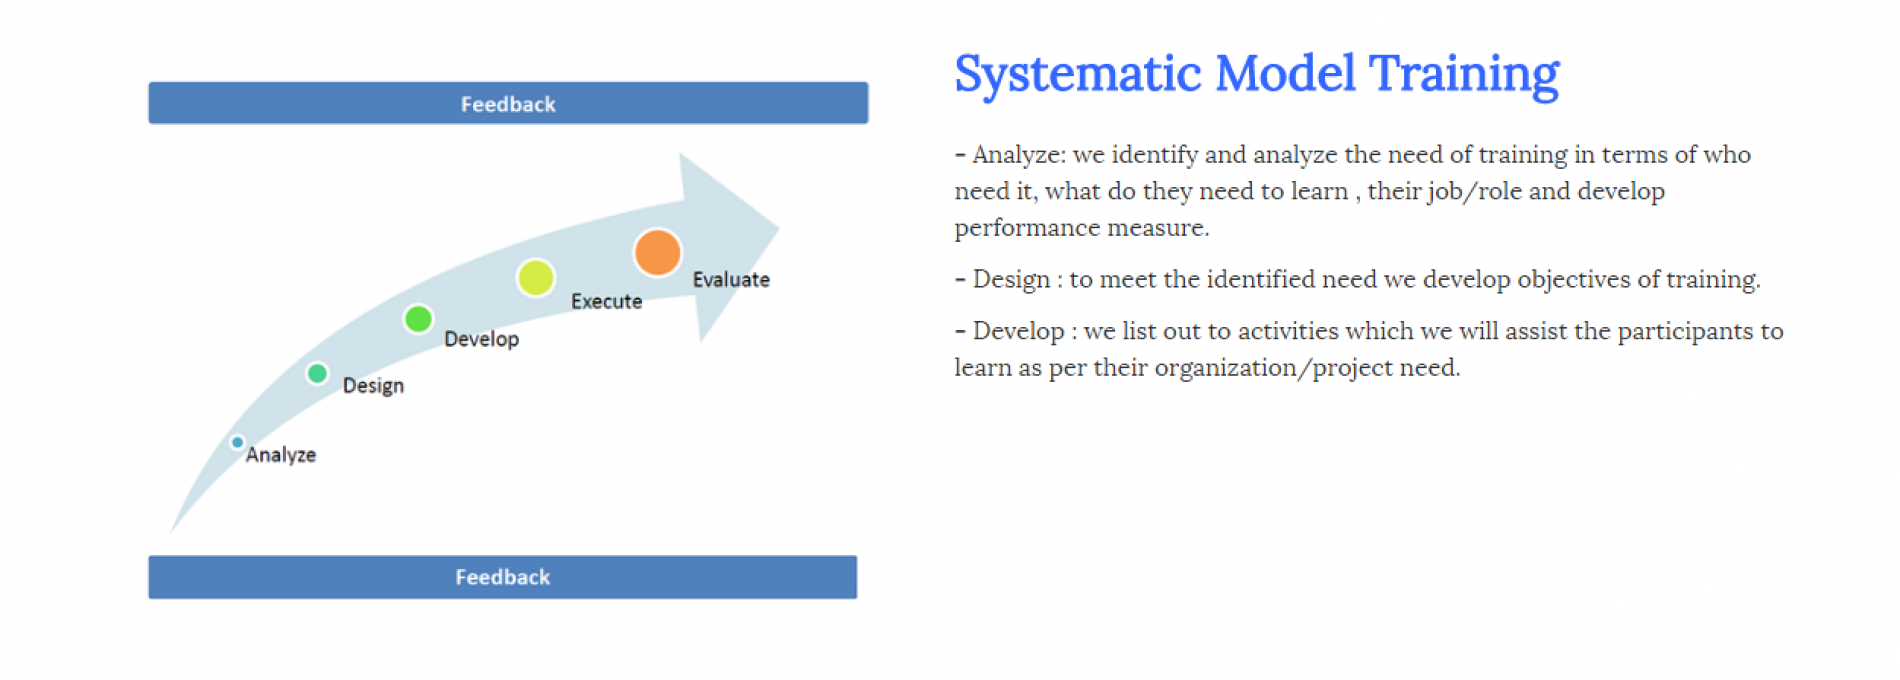 Systematic model training